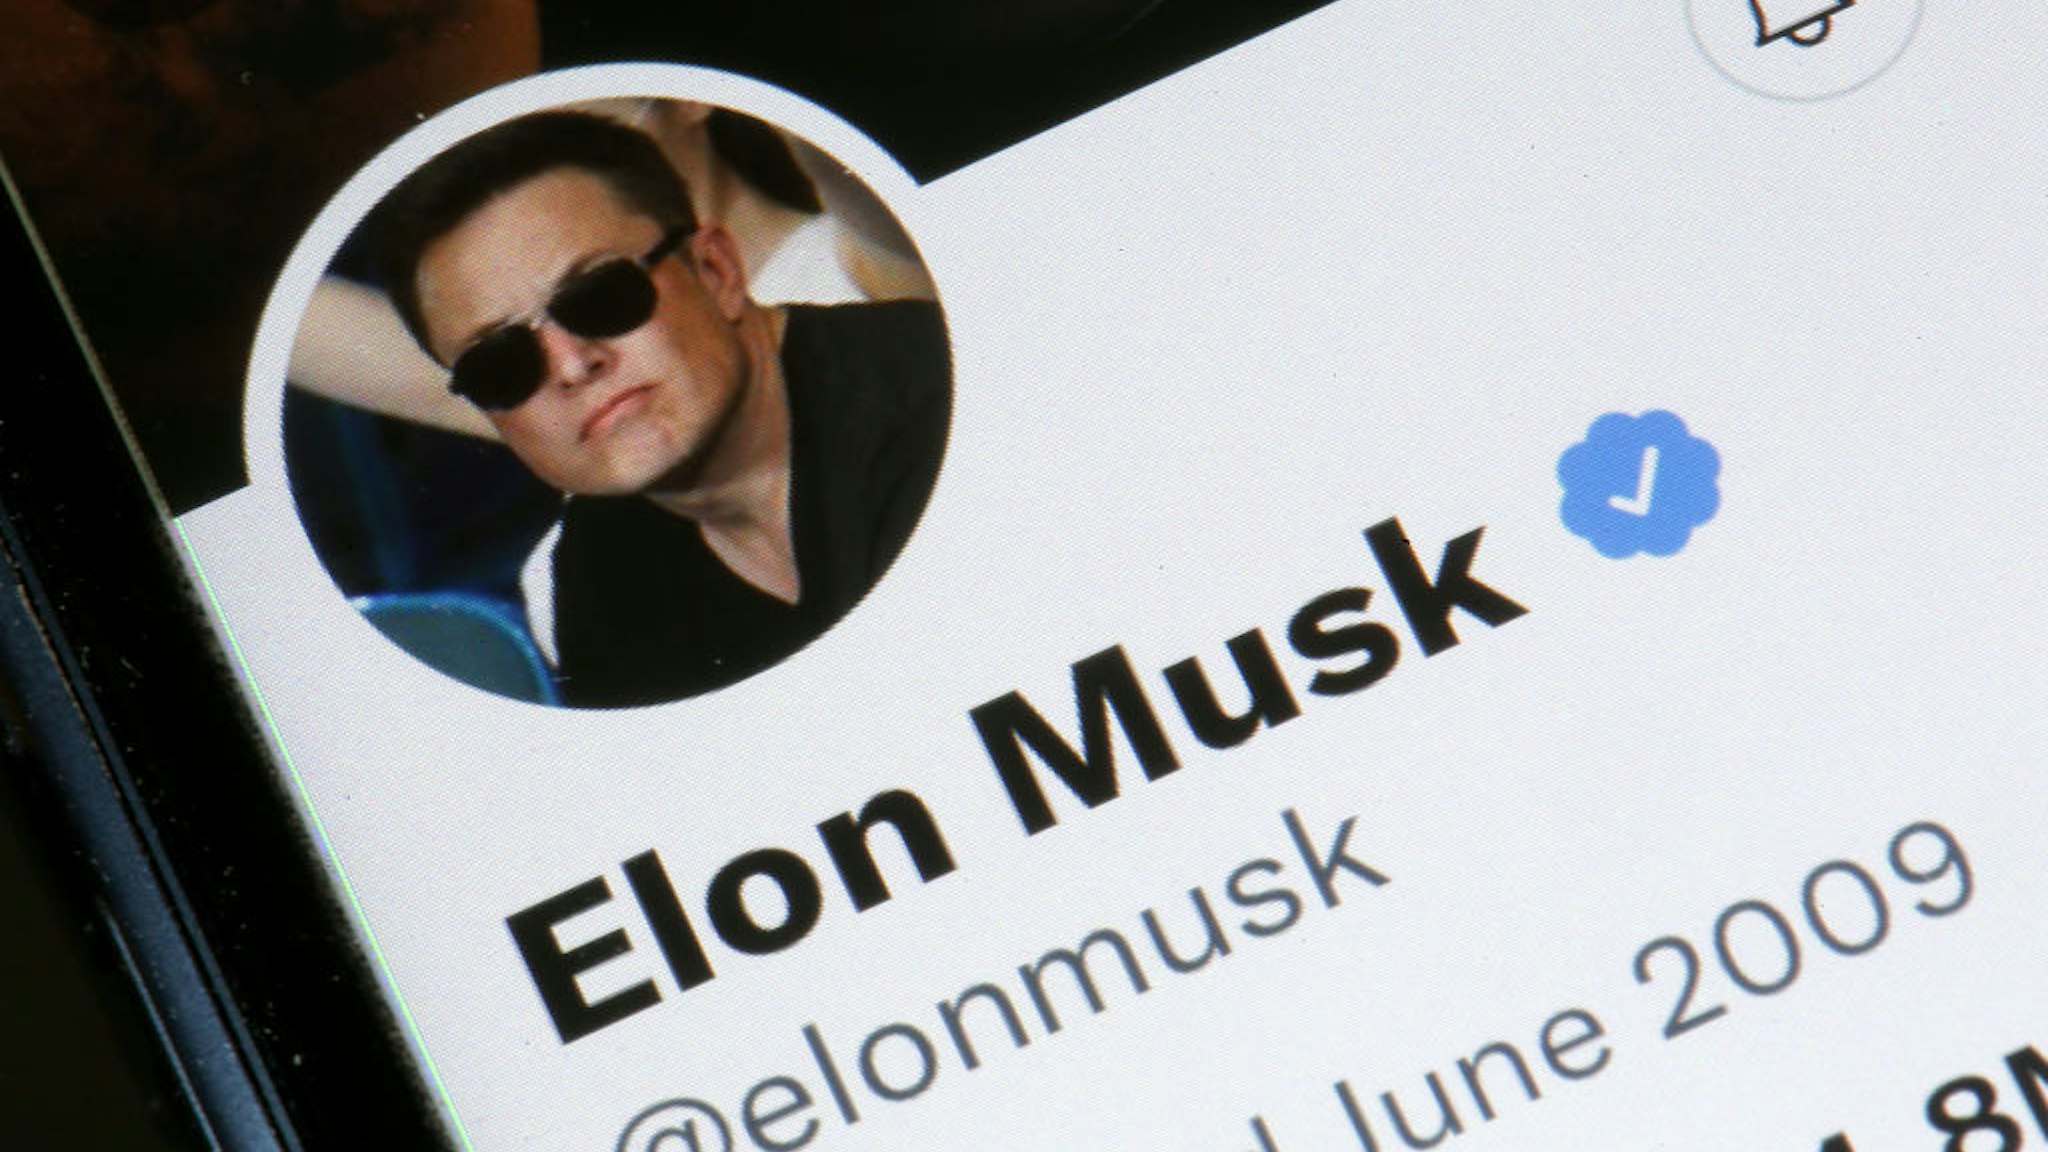 PARIS, FRANCE - APRIL 26: In this photo illustration, the Elon Musk’s Twitter account is displayed on the screen of an iPhone on April 26, 2022 in Paris, France. The U.S. multi-billionaire Elon Musk bought the social network Twitter on Monday April 25 for the sum of 44 billion dollars after two weeks of arm wrestling with the company's board of directors. (Photo illustration by Chesnot/Getty Images)